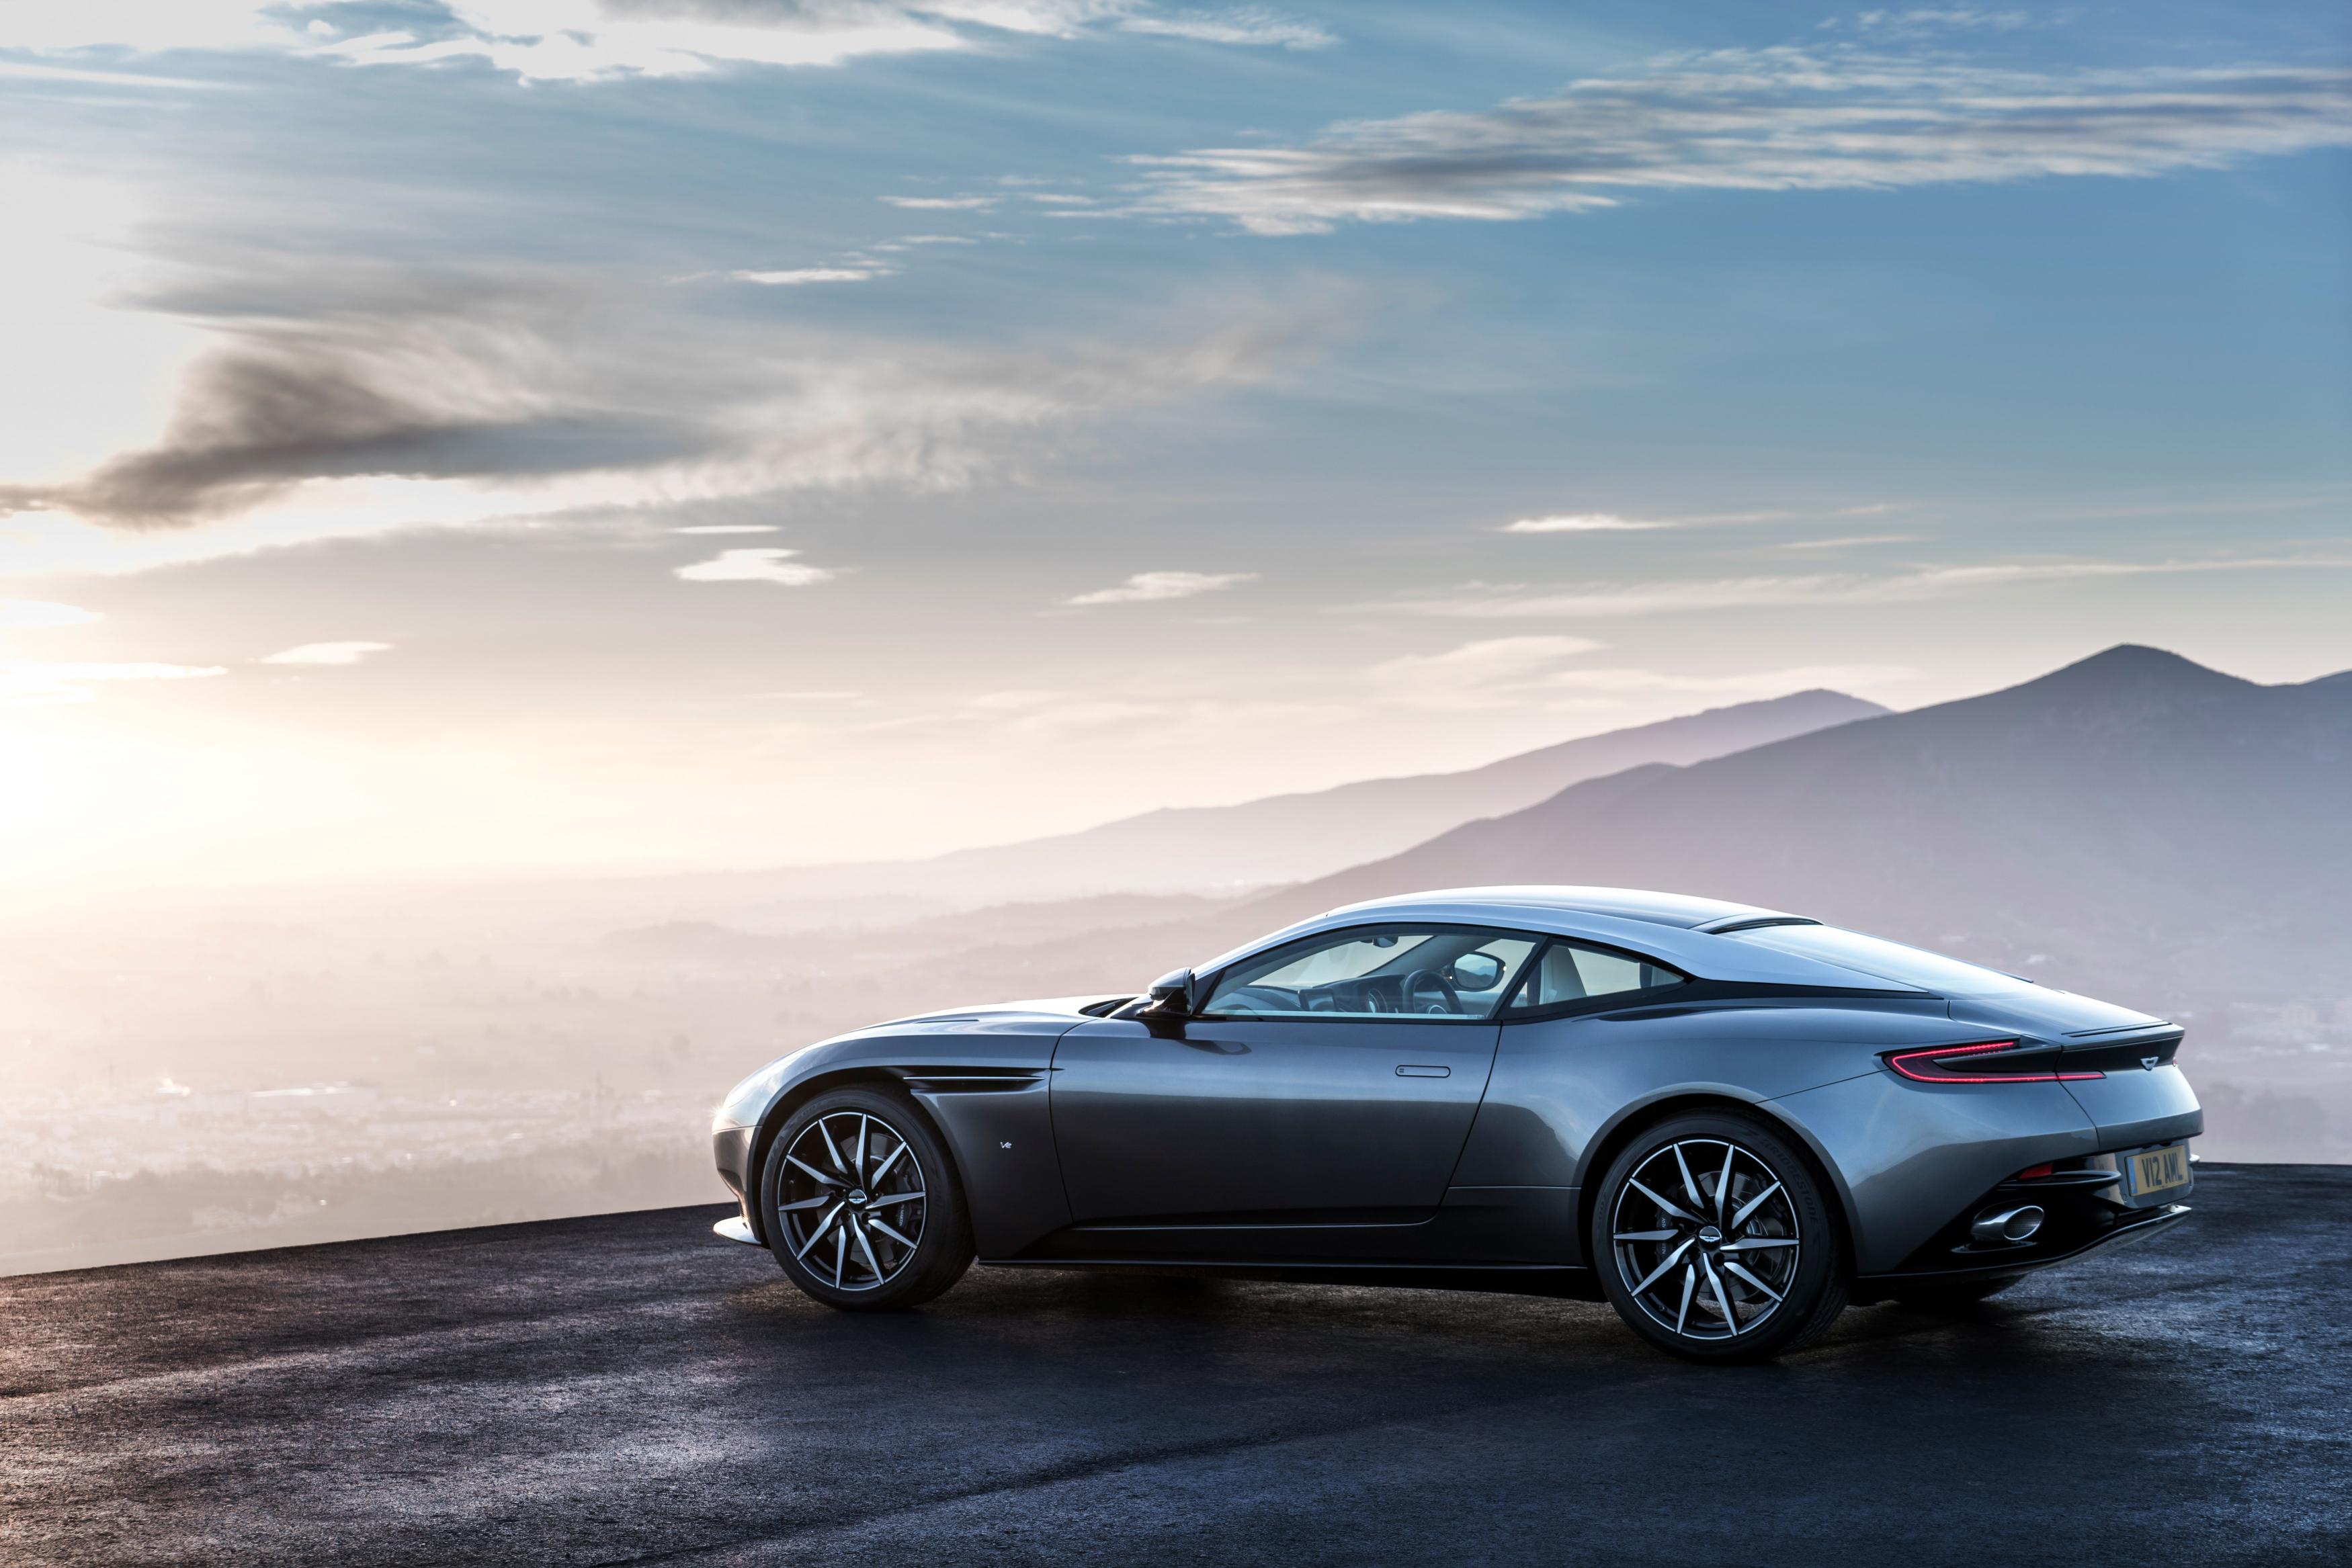 Overdrive: Aston Martin DB11 is as good as it looks